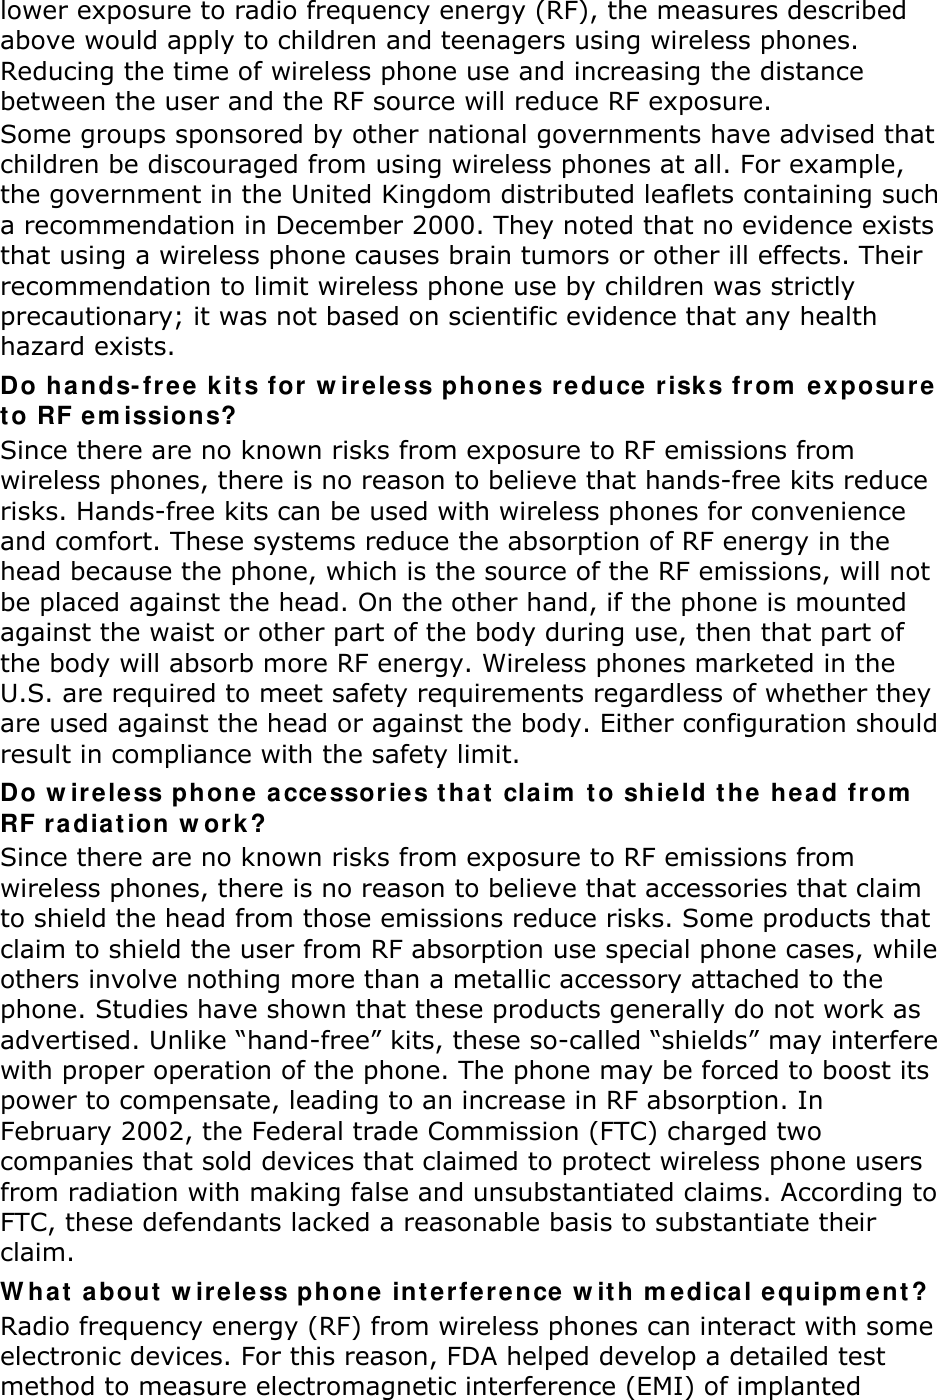 lower exposure to radio frequency energy (RF), the measures described above would apply to children and teenagers using wireless phones. Reducing the time of wireless phone use and increasing the distance between the user and the RF source will reduce RF exposure. Some groups sponsored by other national governments have advised that children be discouraged from using wireless phones at all. For example, the government in the United Kingdom distributed leaflets containing such a recommendation in December 2000. They noted that no evidence exists that using a wireless phone causes brain tumors or other ill effects. Their recommendation to limit wireless phone use by children was strictly precautionary; it was not based on scientific evidence that any health hazard exists.   Do h ands- fr ee k it s for w ireless phones re duce risks fr om  ex posure t o RF em issions? Since there are no known risks from exposure to RF emissions from wireless phones, there is no reason to believe that hands-free kits reduce risks. Hands-free kits can be used with wireless phones for convenience and comfort. These systems reduce the absorption of RF energy in the head because the phone, which is the source of the RF emissions, will not be placed against the head. On the other hand, if the phone is mounted against the waist or other part of the body during use, then that part of the body will absorb more RF energy. Wireless phones marketed in the U.S. are required to meet safety requirements regardless of whether they are used against the head or against the body. Either configuration should result in compliance with the safety limit. Do w ir eless phone  accessories tha t  claim  t o shield the  head from  RF ra diat ion w ork ? Since there are no known risks from exposure to RF emissions from wireless phones, there is no reason to believe that accessories that claim to shield the head from those emissions reduce risks. Some products that claim to shield the user from RF absorption use special phone cases, while others involve nothing more than a metallic accessory attached to the phone. Studies have shown that these products generally do not work as advertised. Unlike “hand-free” kits, these so-called “shields” may interfere with proper operation of the phone. The phone may be forced to boost its power to compensate, leading to an increase in RF absorption. In February 2002, the Federal trade Commission (FTC) charged two companies that sold devices that claimed to protect wireless phone users from radiation with making false and unsubstantiated claims. According to FTC, these defendants lacked a reasonable basis to substantiate their claim. W hat  about  w ir ele ss phone  int e rfe rence  w it h m edica l equipm e nt ? Radio frequency energy (RF) from wireless phones can interact with some electronic devices. For this reason, FDA helped develop a detailed test method to measure electromagnetic interference (EMI) of implanted 